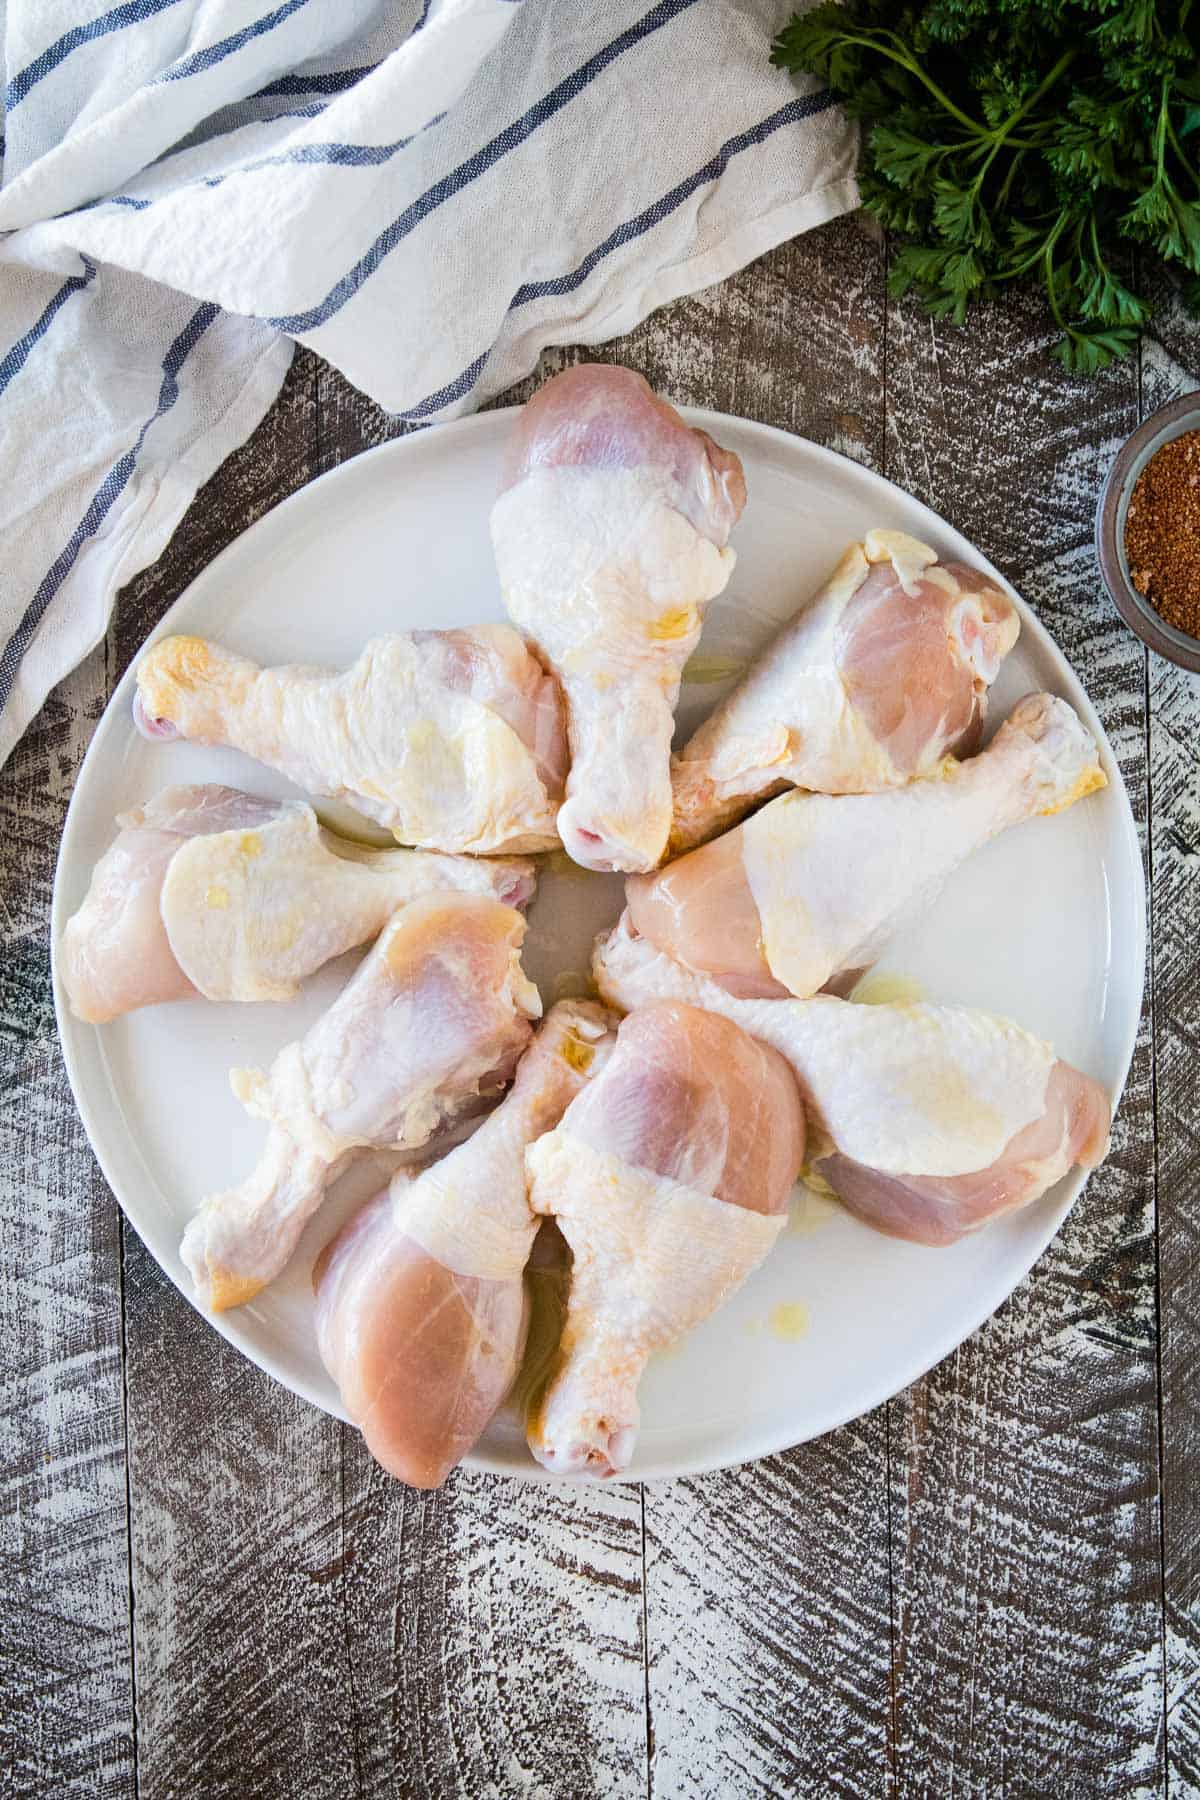 Plate of chicken legs with olive oil